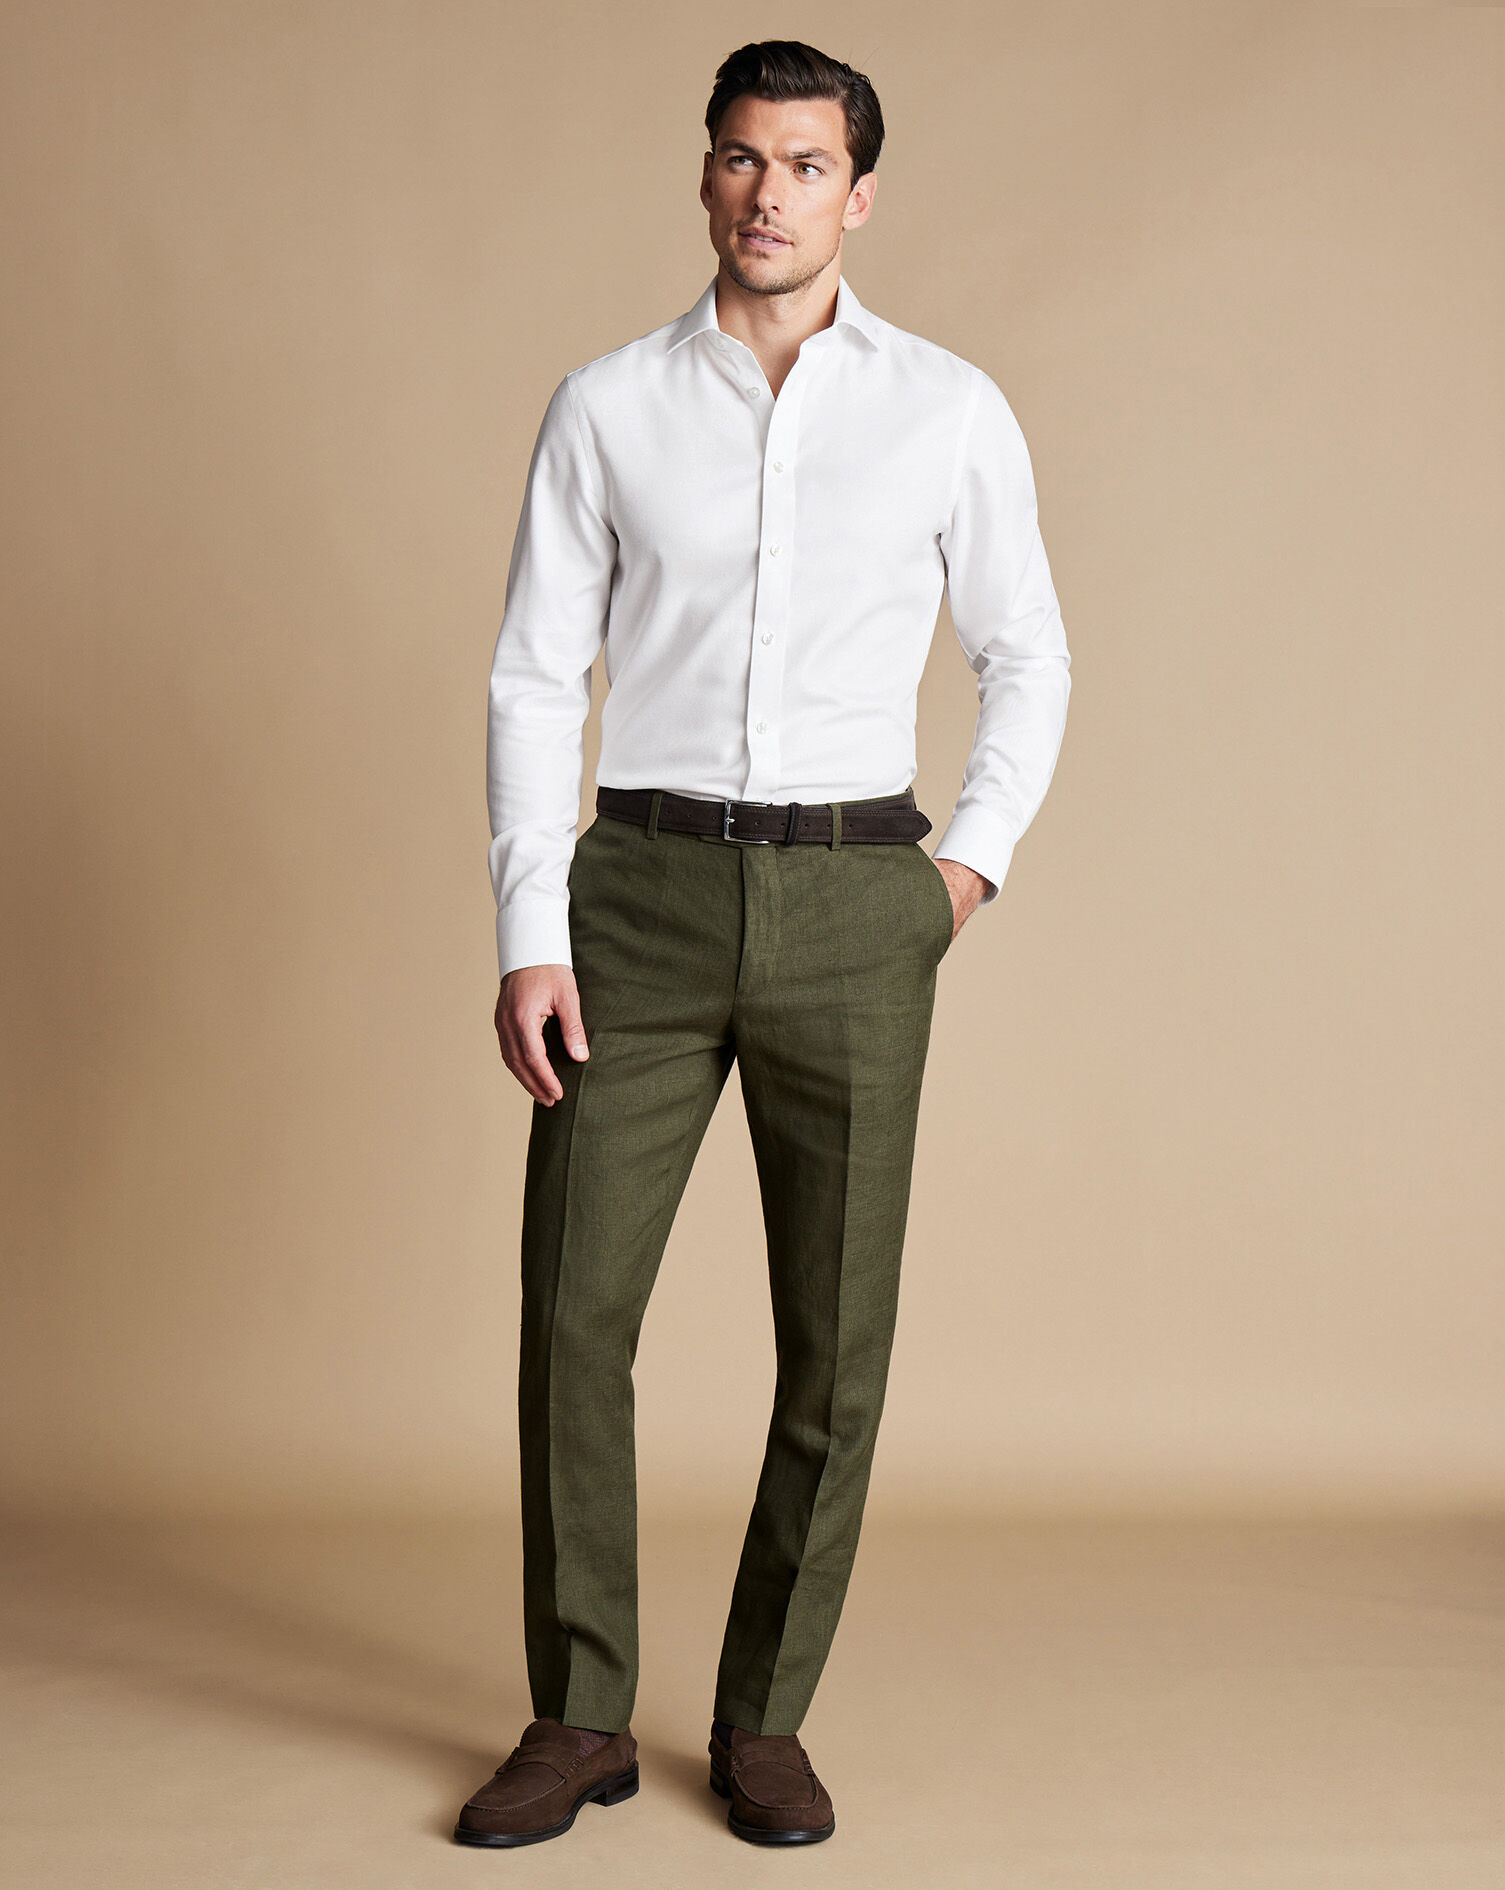 Sienna Pink Moleskin Trousers | Men's Country Clothing | Cordings US